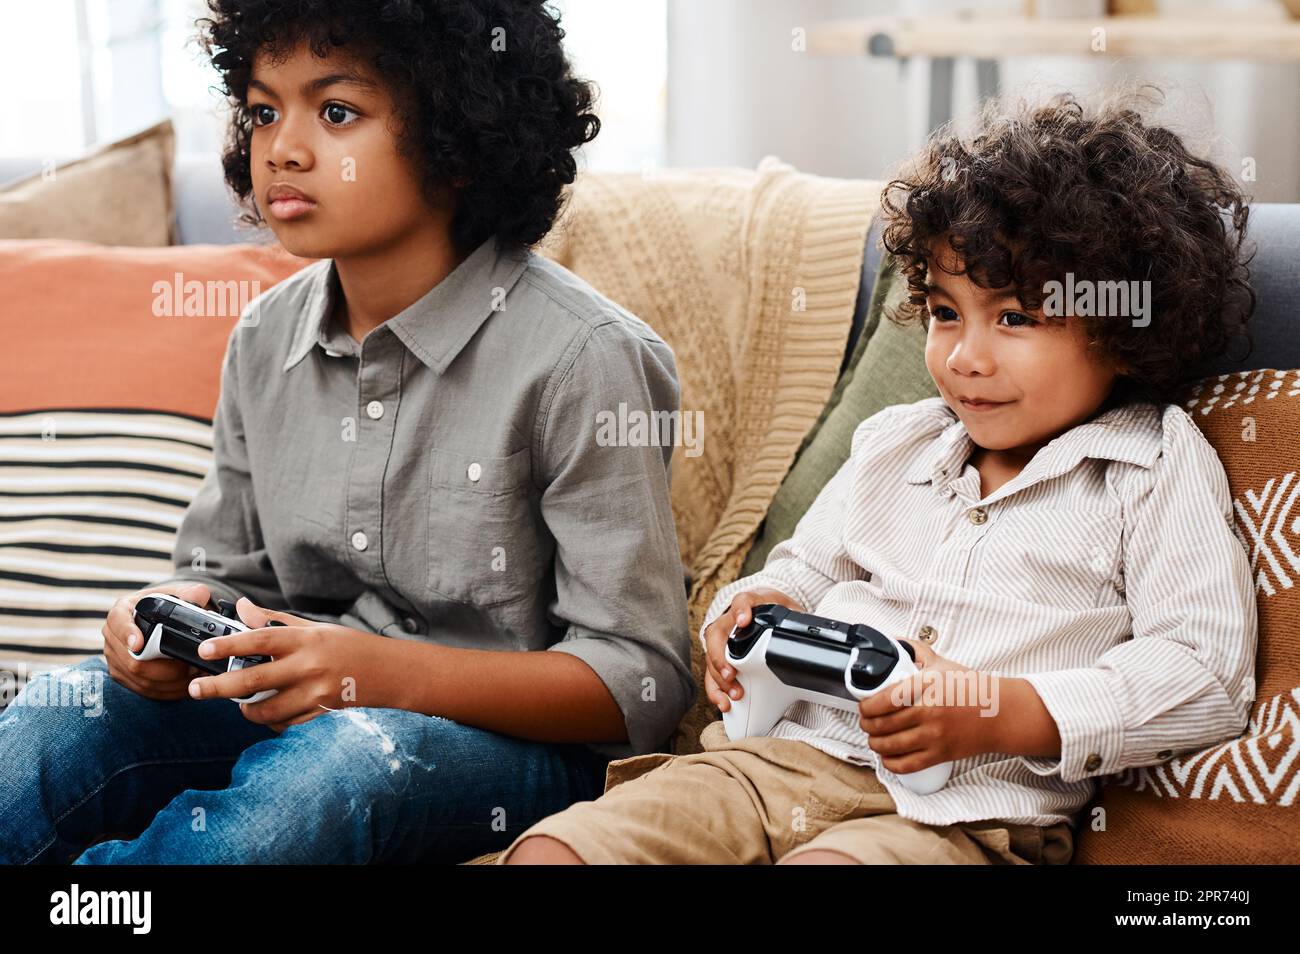 Happy Little Cute Kid Playing Video Game. the Boy Has Addiction To